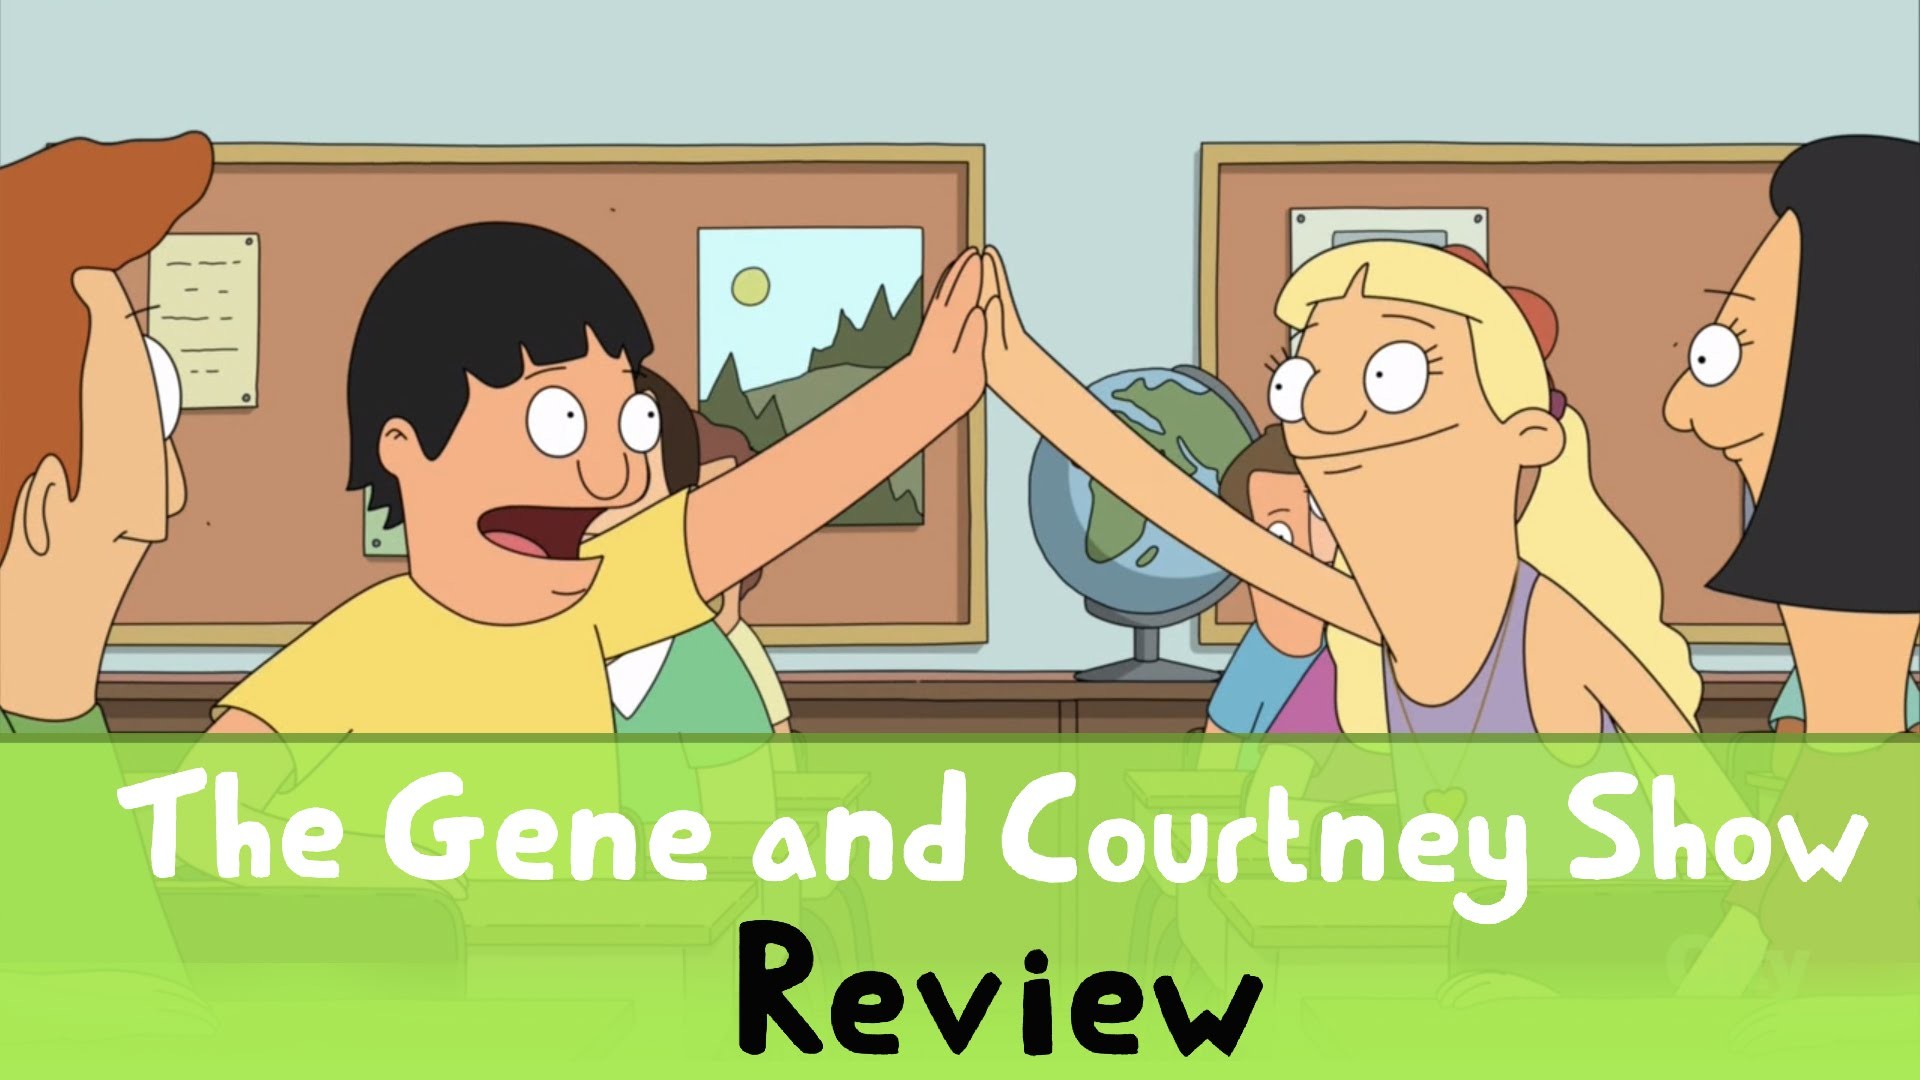 Bobs Burgers S6 – The Gene Courtney Show Review